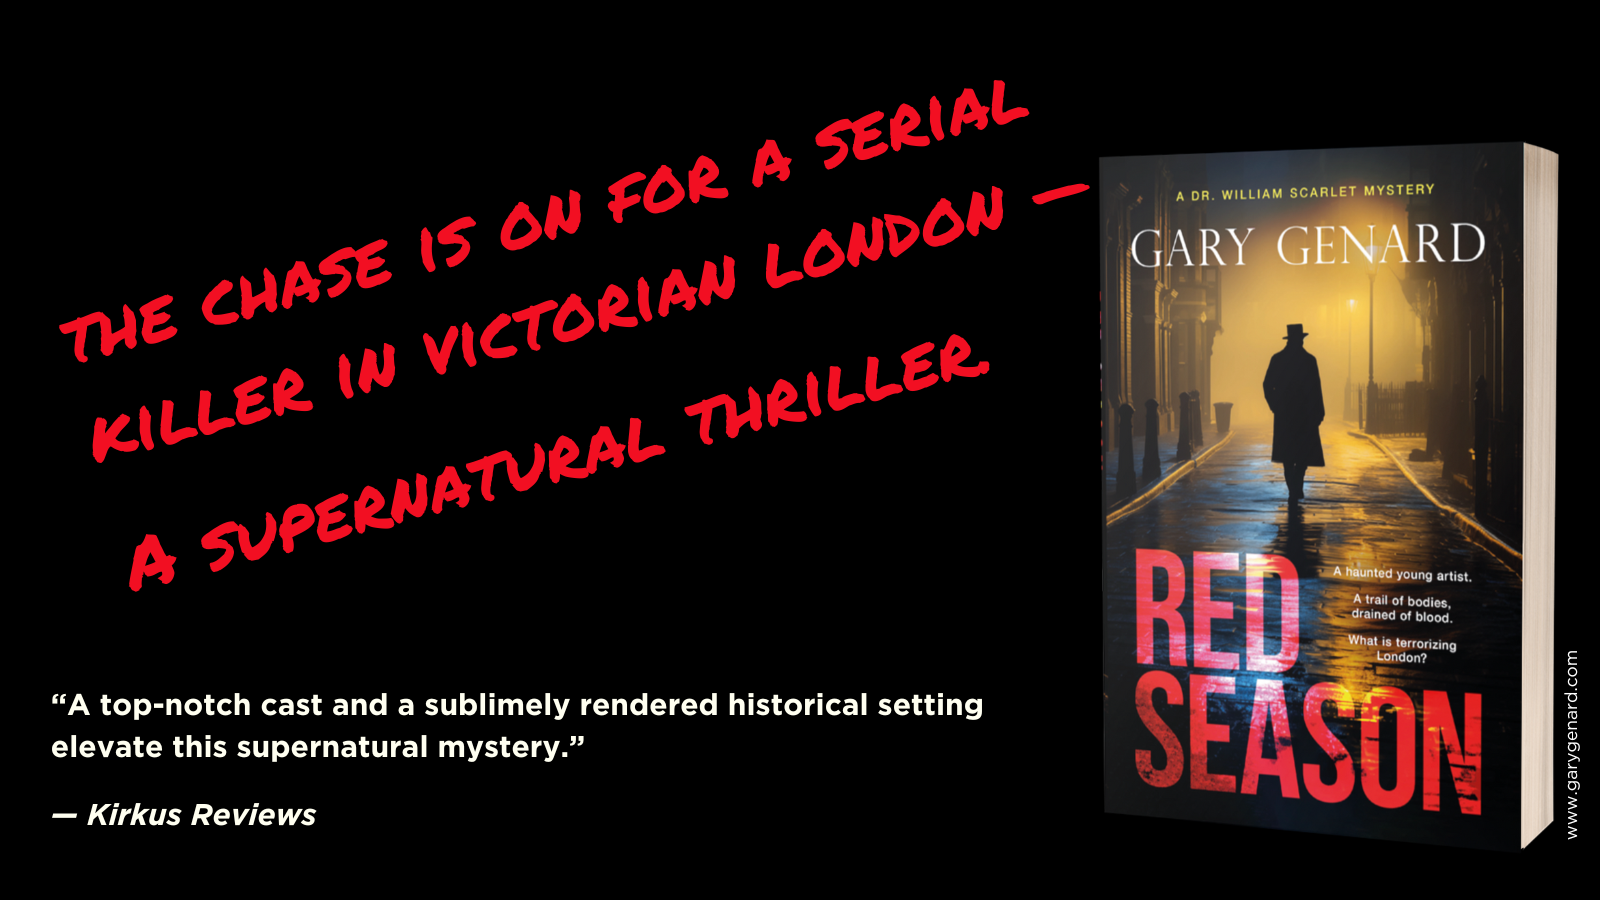 Red Season: A tale of romantic obsession, murder, and the supernatural, by Gary Genard.